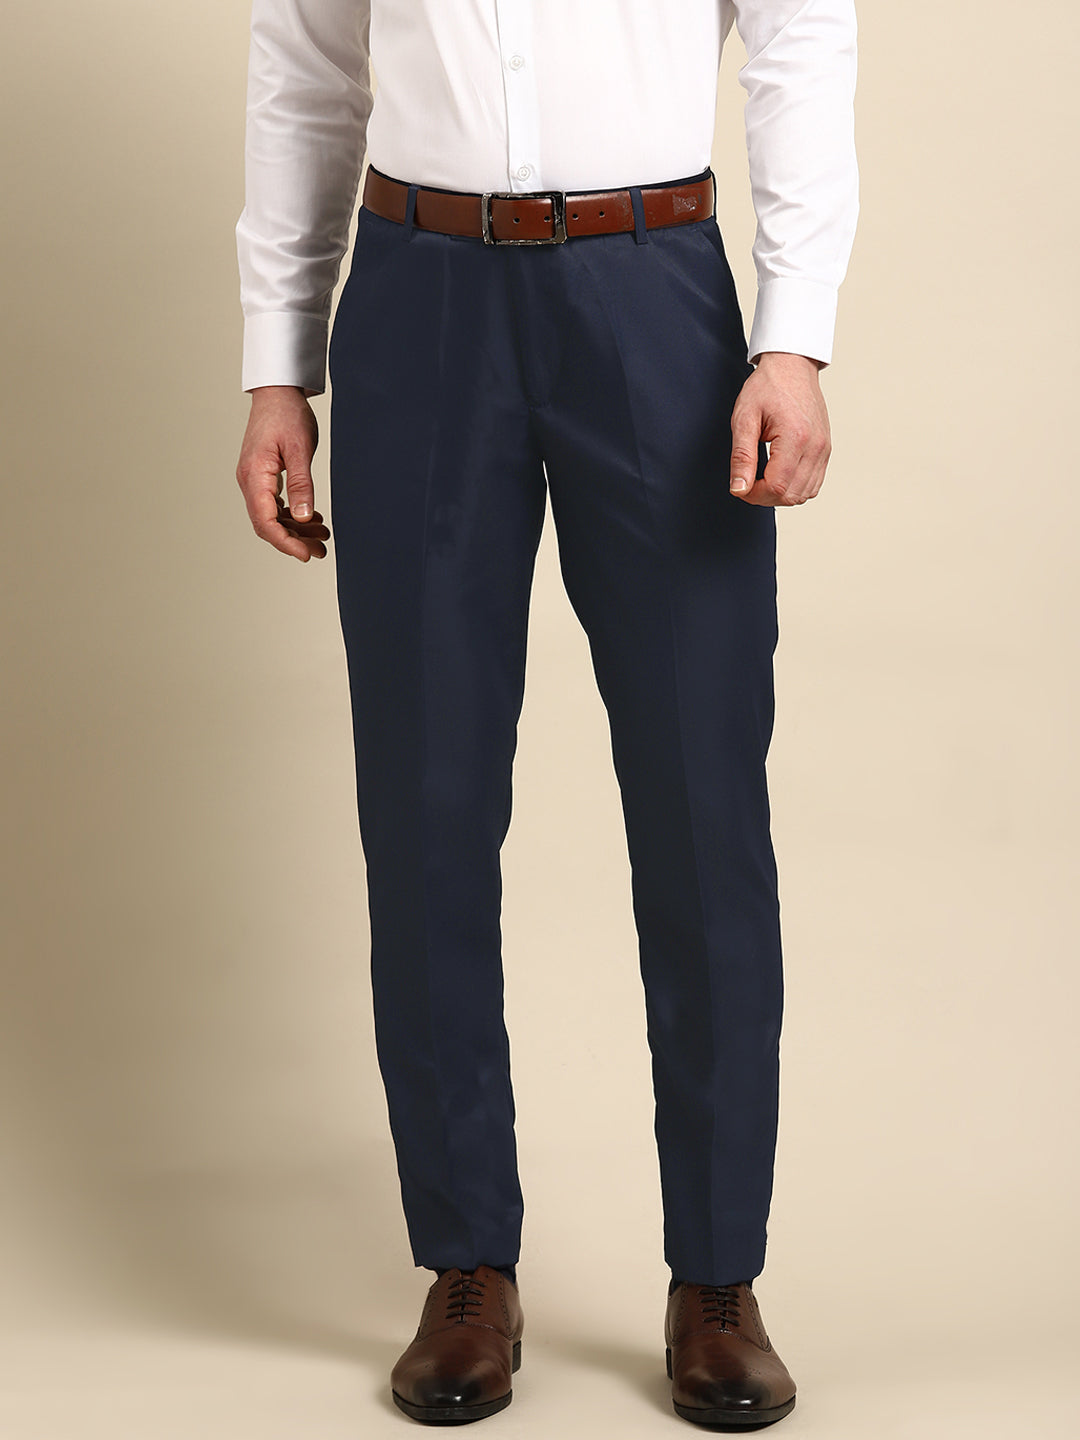 Fashion Front Suit Trousers For Men- Navy Blue | Konga Online Shopping